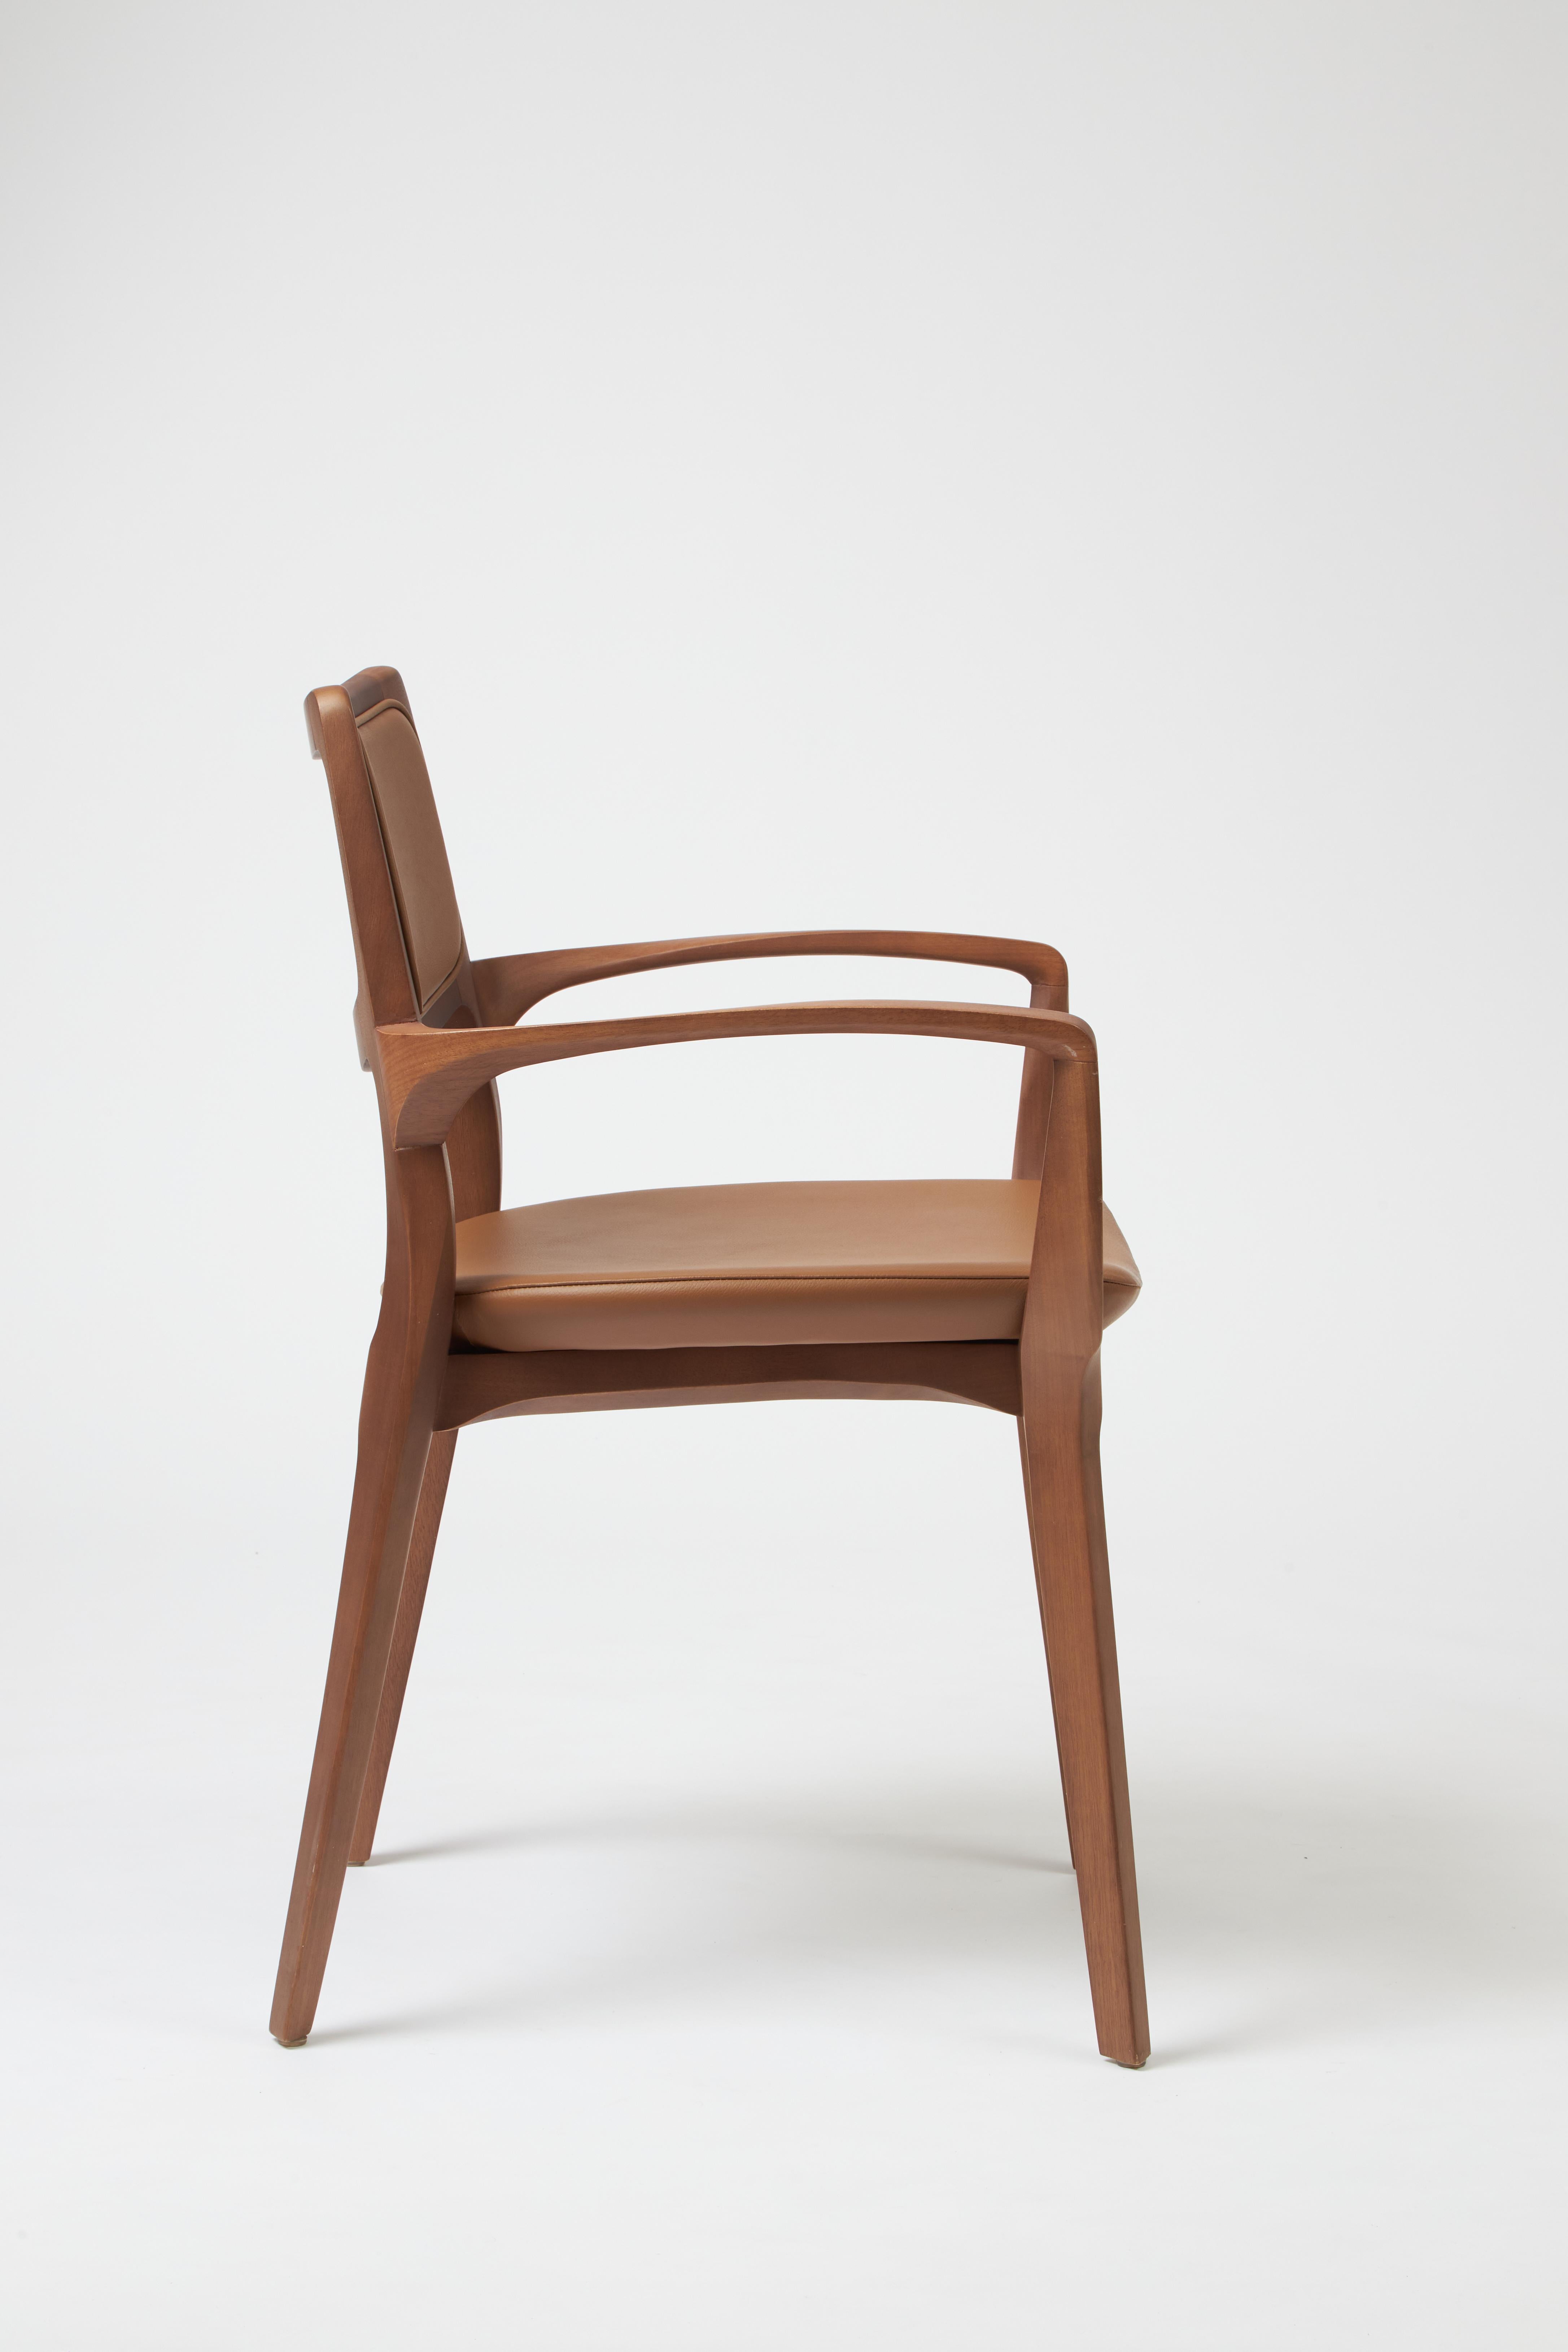 Caning Modern Style Aurora Chair Sculpted in Walnut Finish Arms, leather back & seating For Sale